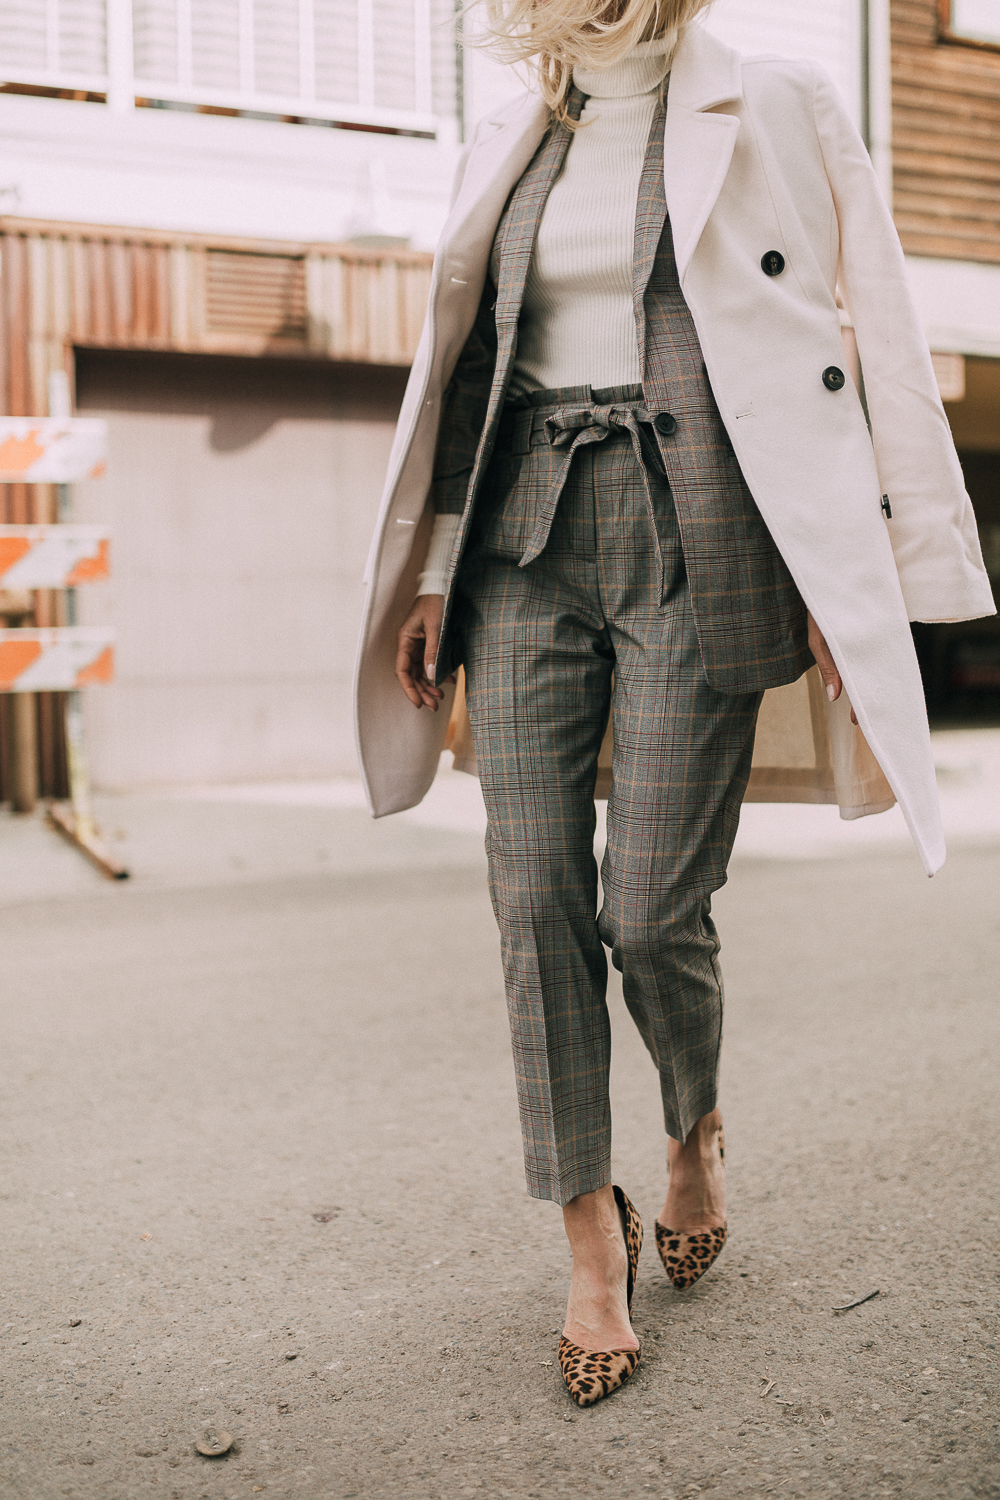 express workwear outfit idea what to wear to office fall attire plaid pants leopard pumps